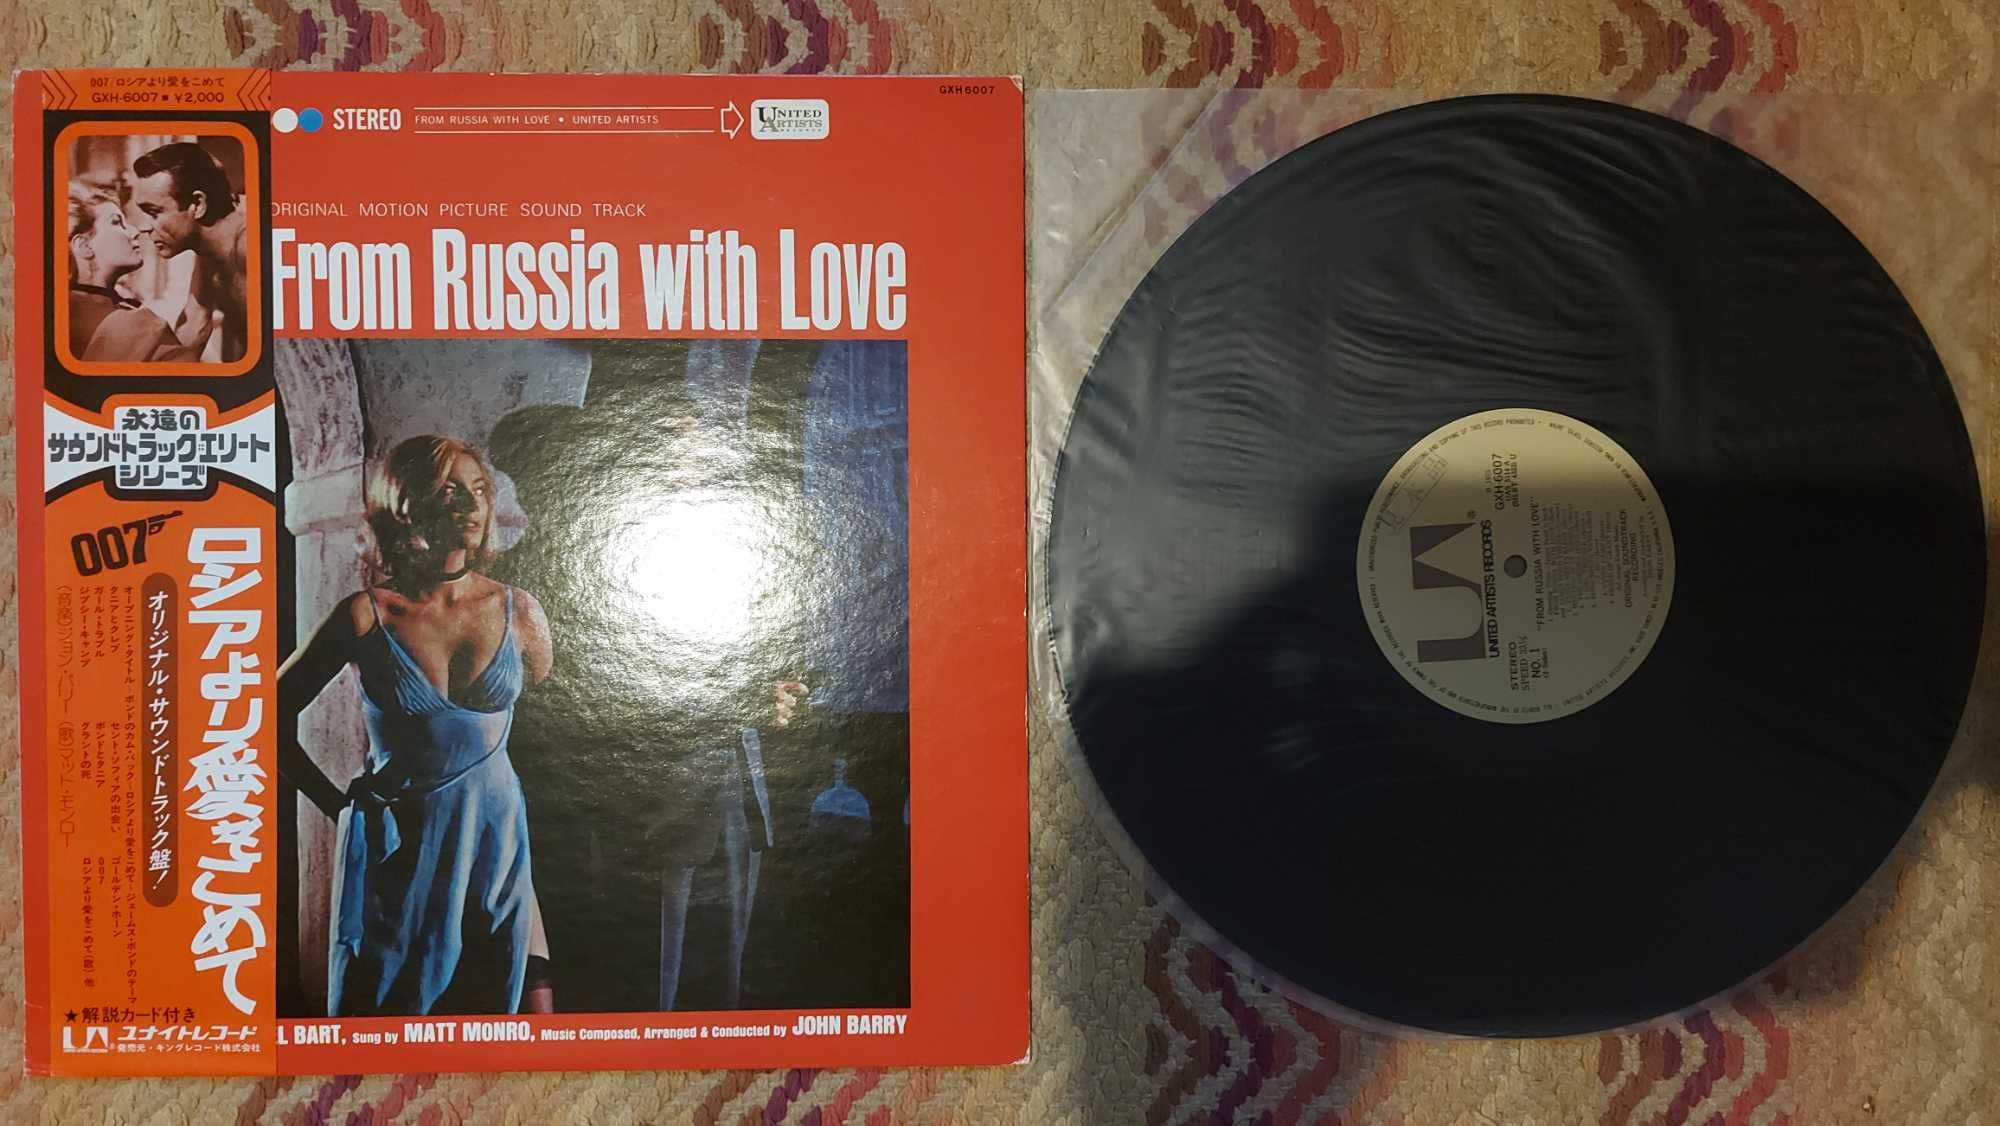 Soundtrack 007 From Russia With Love (Original   1975  Japan  (NM/EX+)